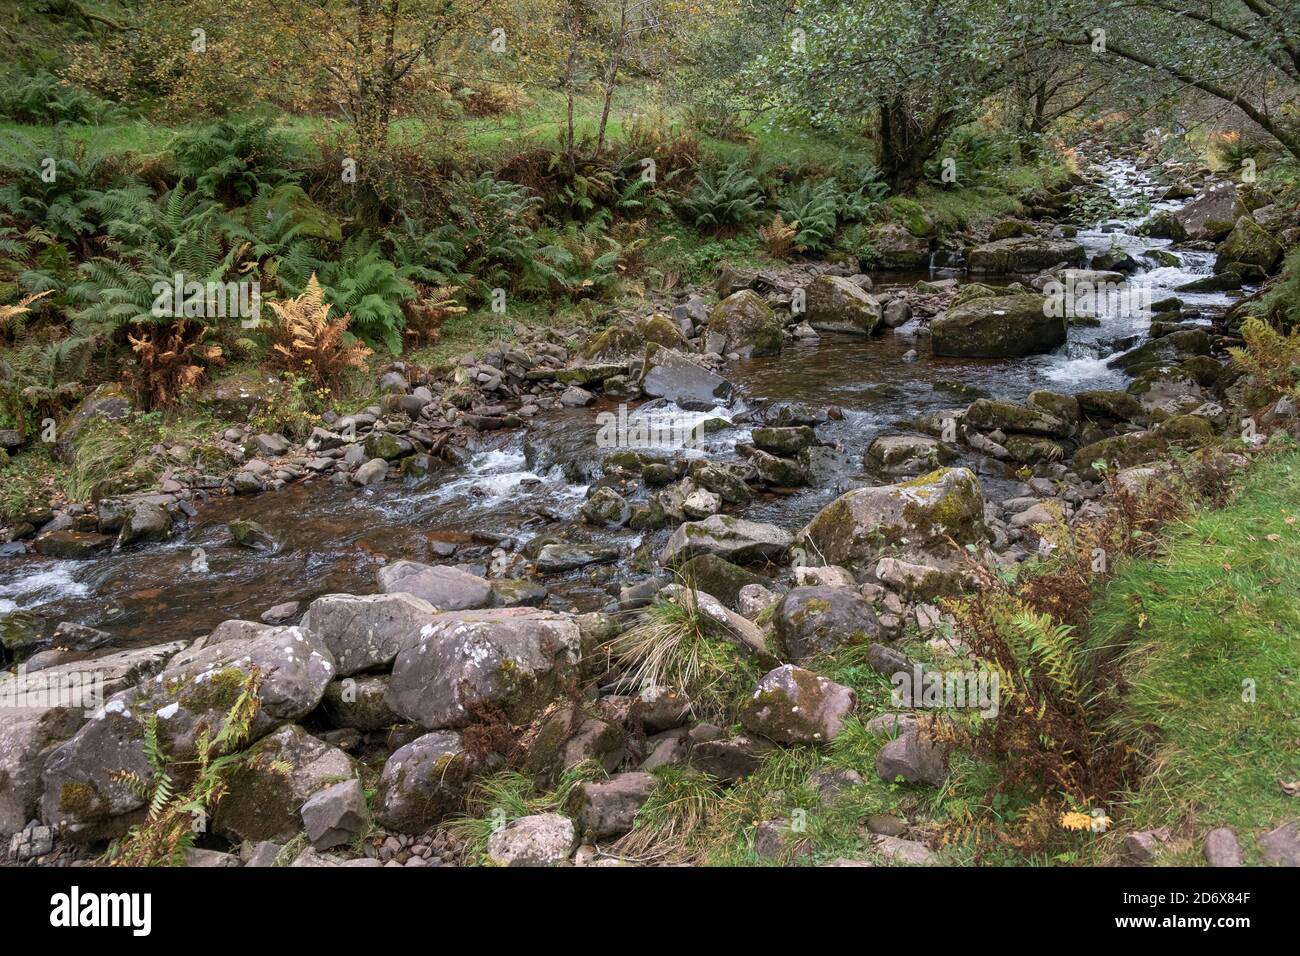 Blaen y Glyn ISAF, Talybont Forest, Brecon Beacons National Park, Breconshire, Wales Stockfoto